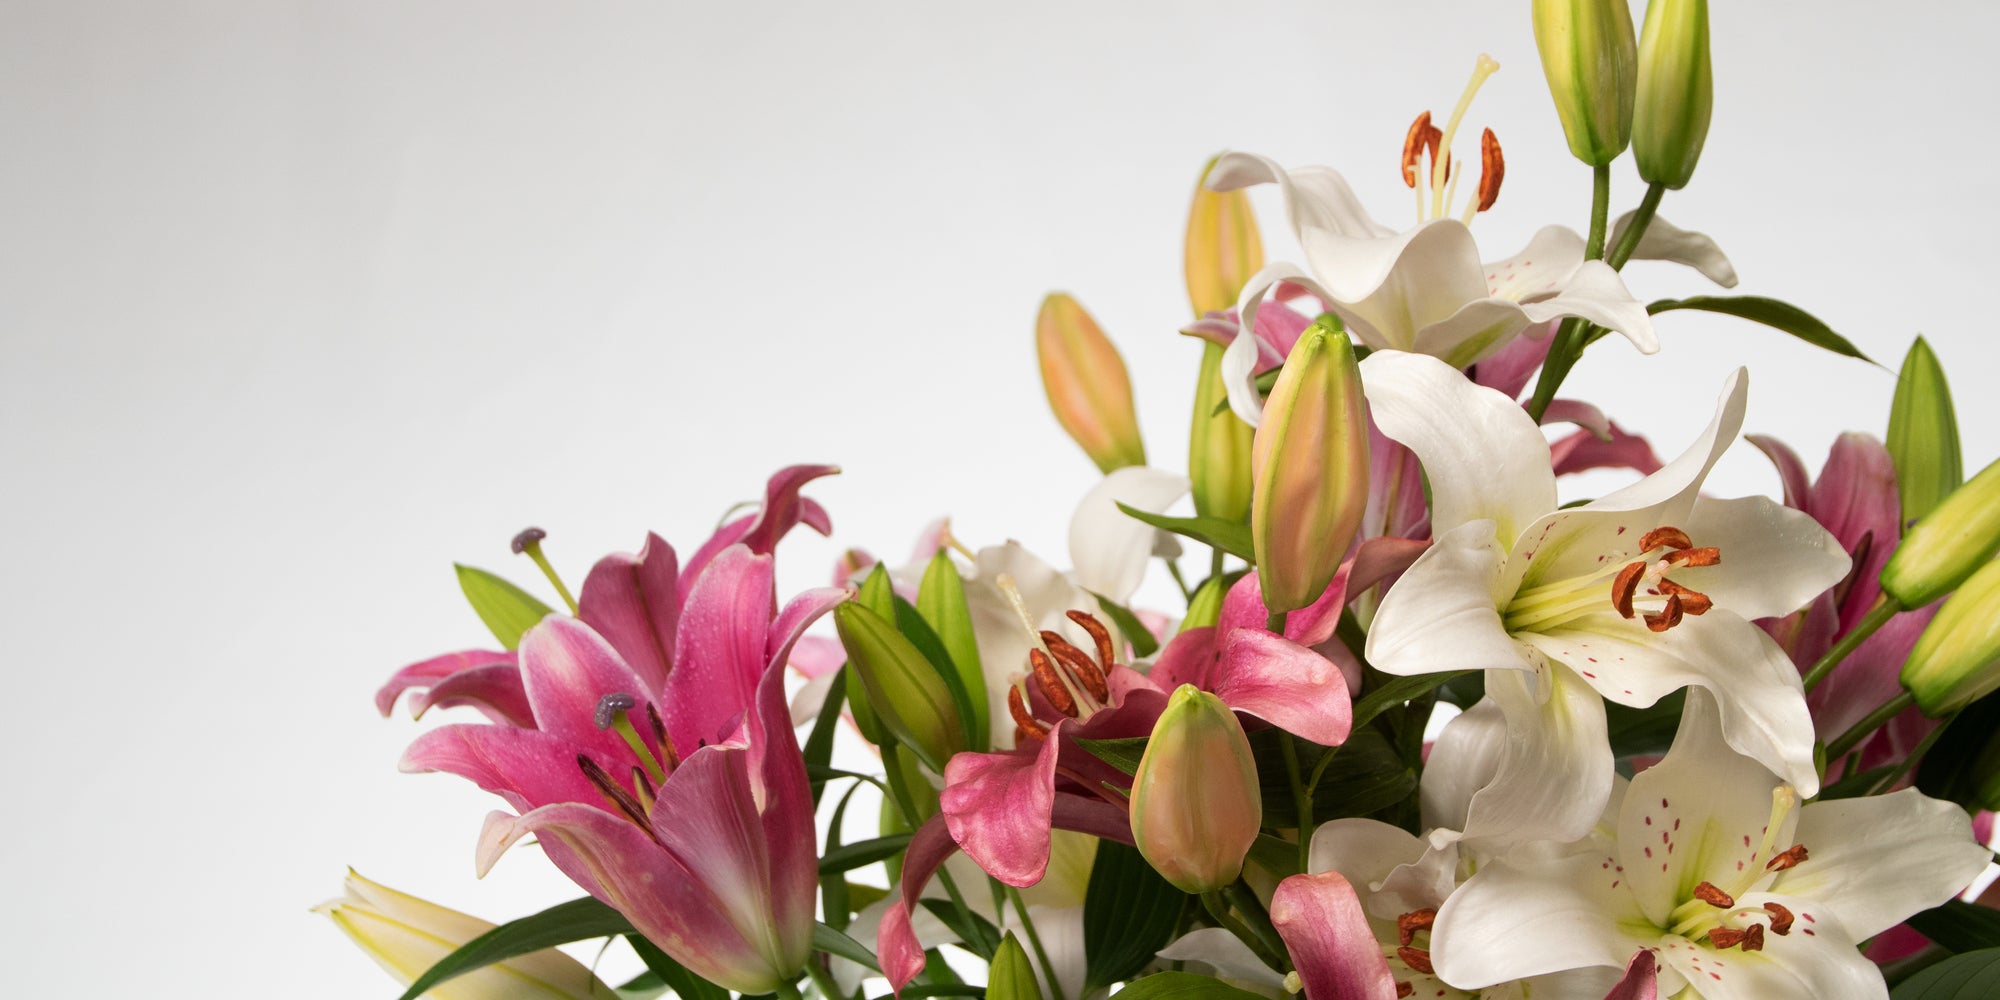 A Floristry design using a combination of fresh and artificial Lilies